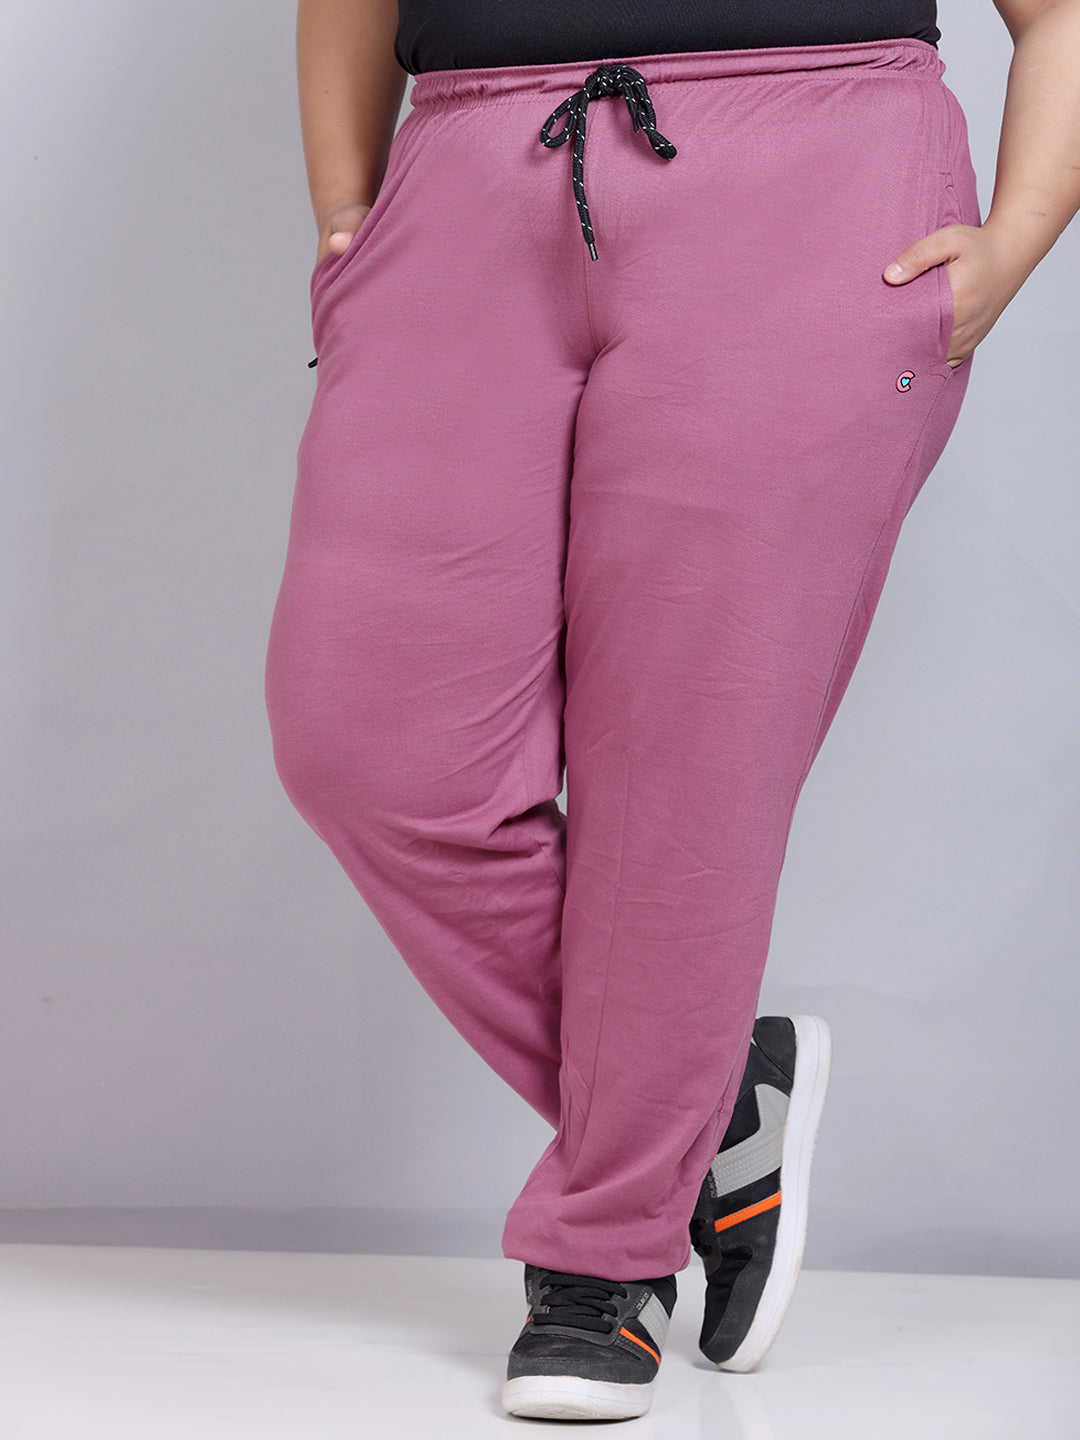 Comfy Mauve Cotton Track Pants For Women At Best Prices